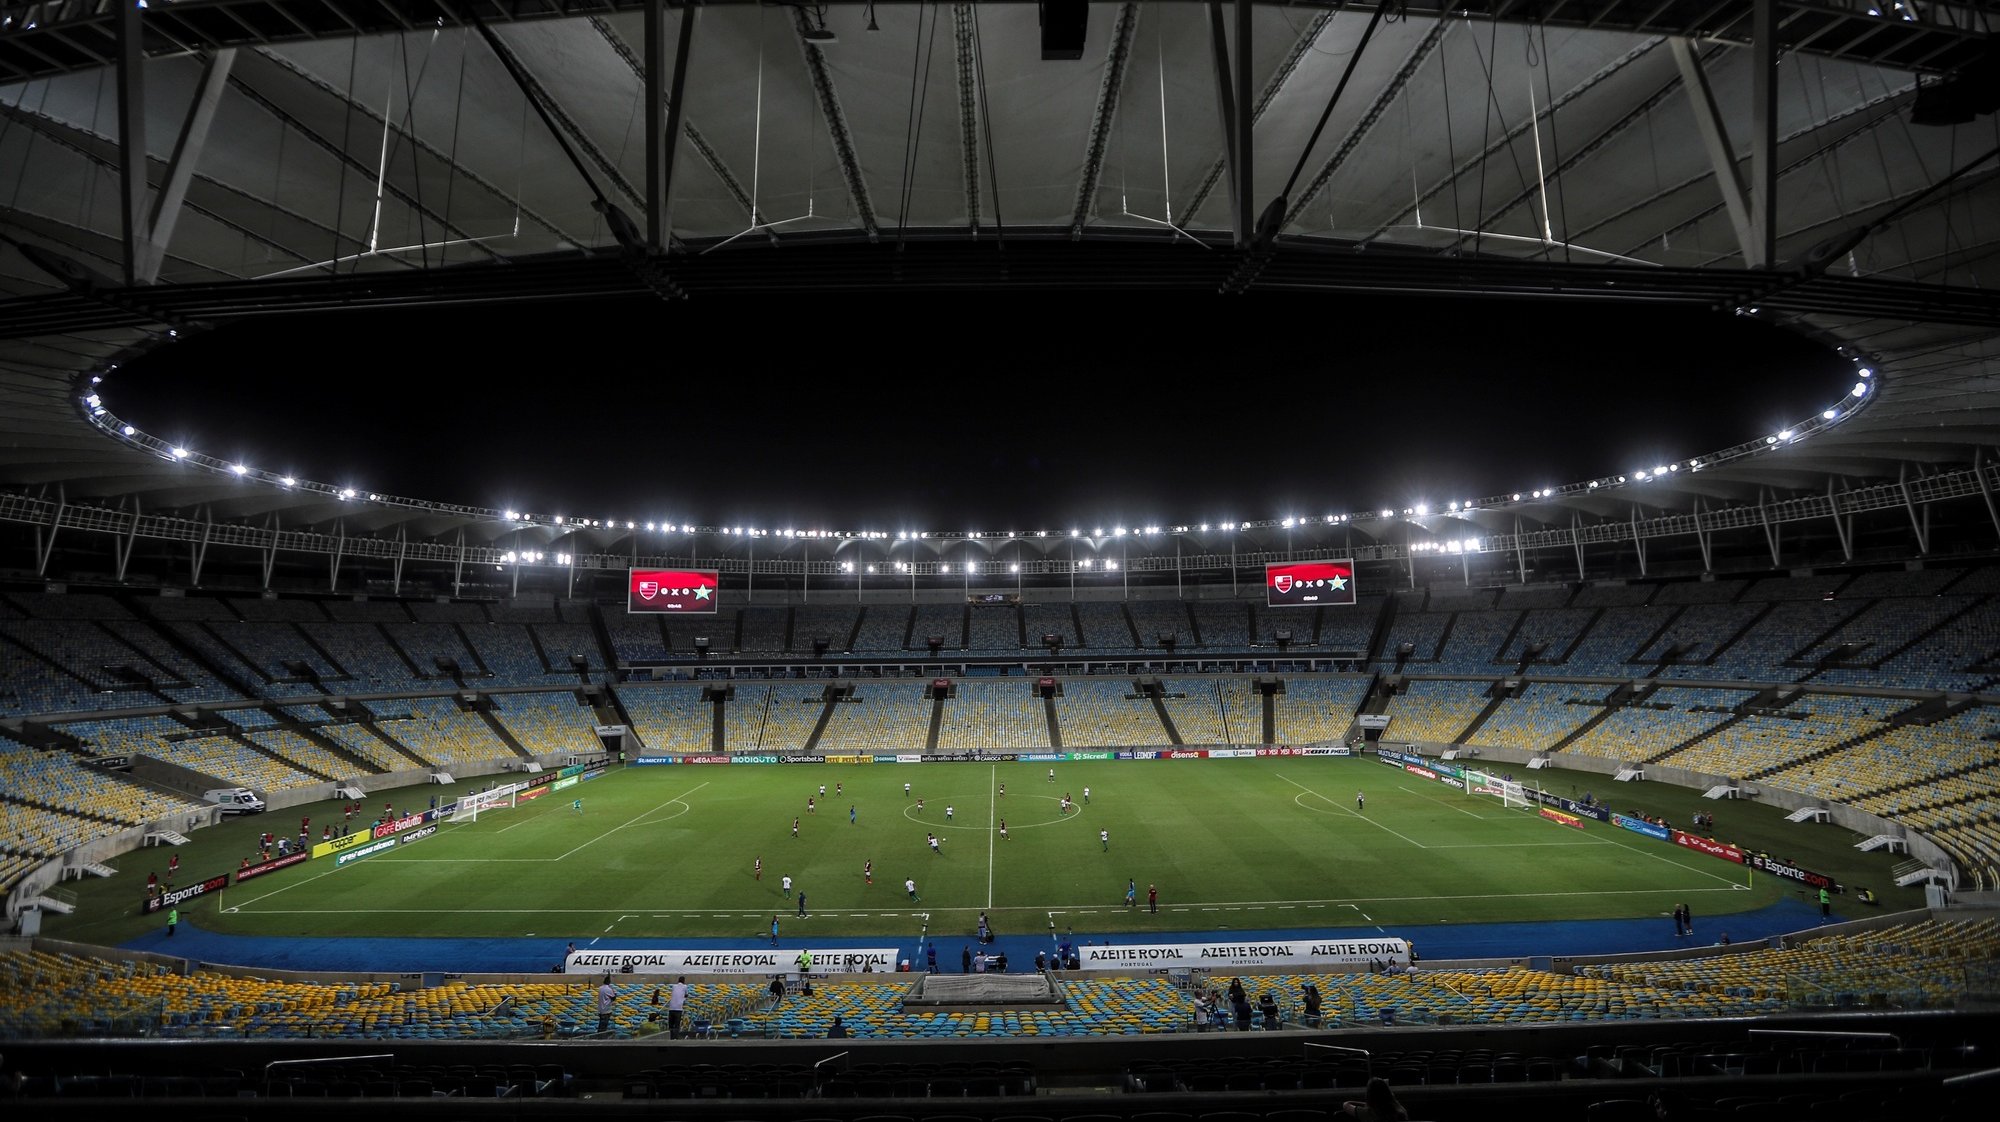 epa08294895 General view of the Maracana without fans during the game between Flamengo Vs. Portuguesa for the Rio de Janeiro soccer championship, in the empty Maracana stadium, in Rio de Janeiro, Brazil, 14 March 2020. The soccer matches scheduled for today and tomorrow in most Brazilian stadiums, including Rio de Janeiro and Sao Paulo, will be behind closed doors, over fears that large public gatherings will facilitate the expansion of the coronavirus in Brazil.  EPA/Antonio Lacerda